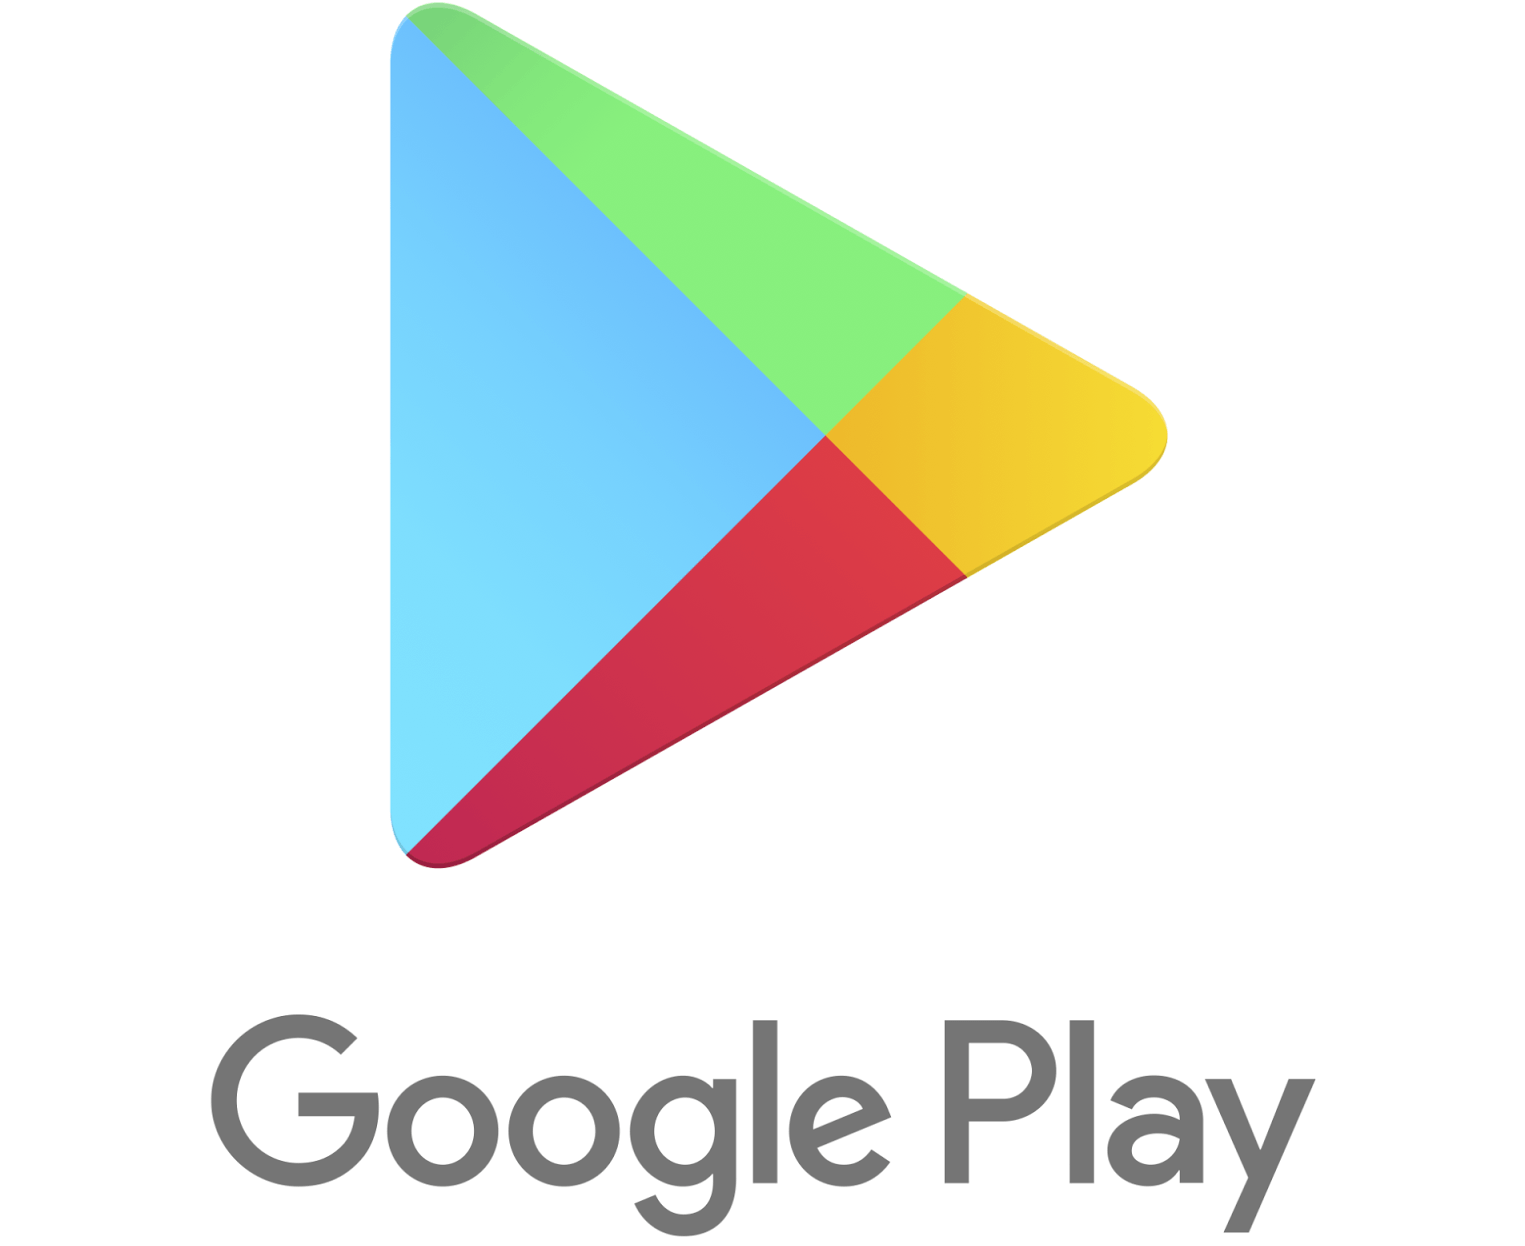 Updated Google Logo - How to update the Google Play app on your Android phone or tablet |